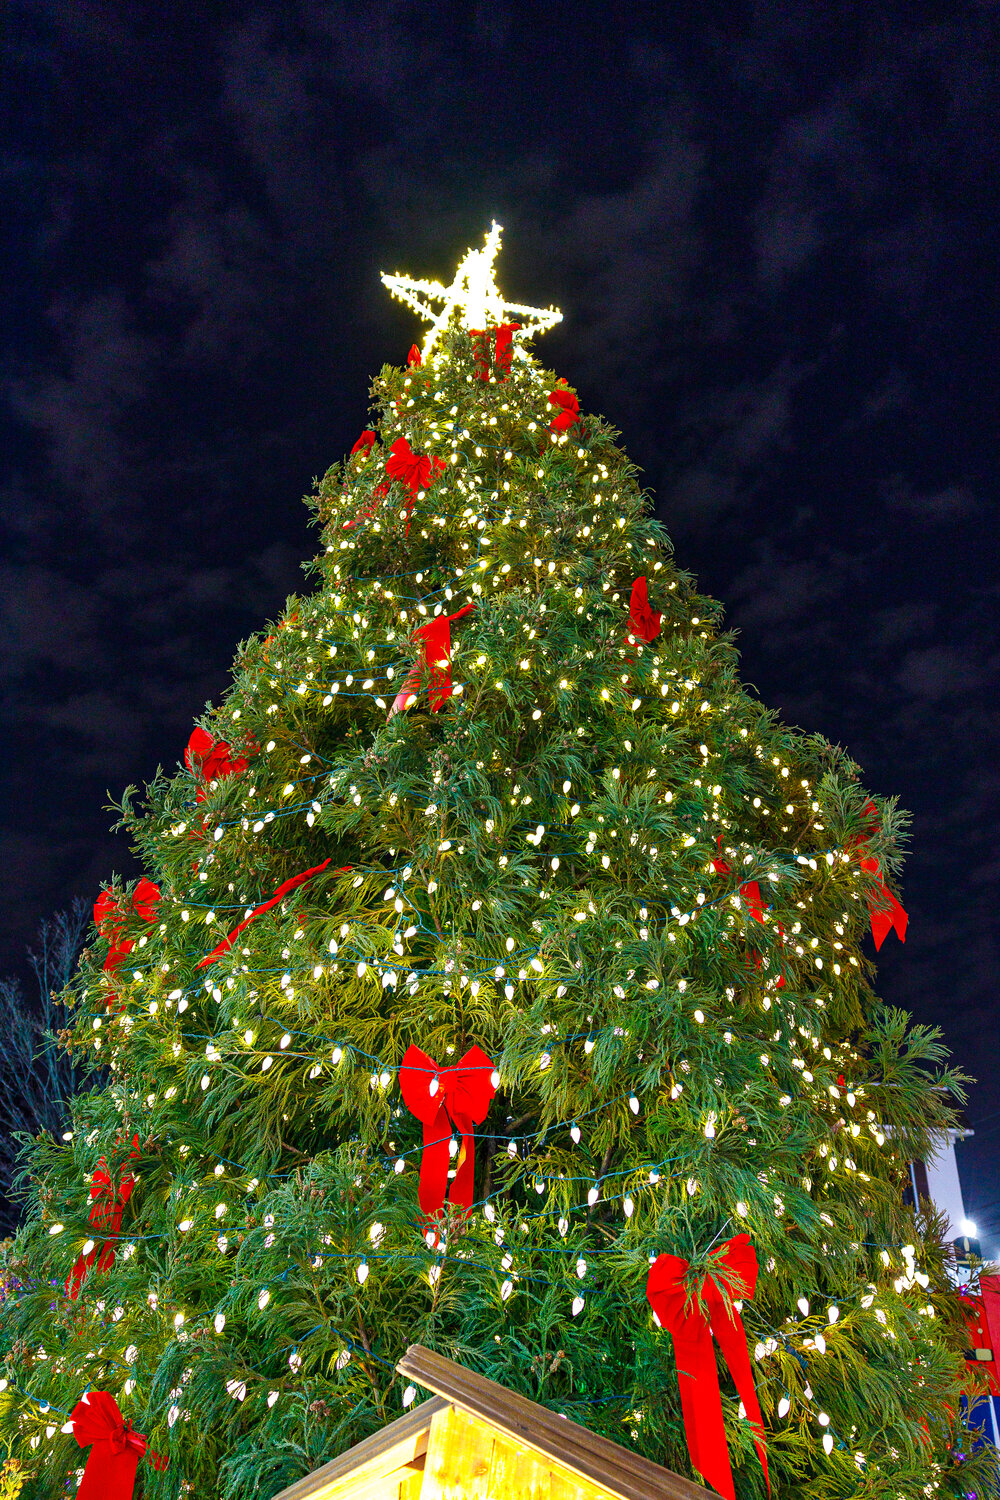 A Christmas tree lit up the heart of Lynbrook in the village’s annual holiday celebration.